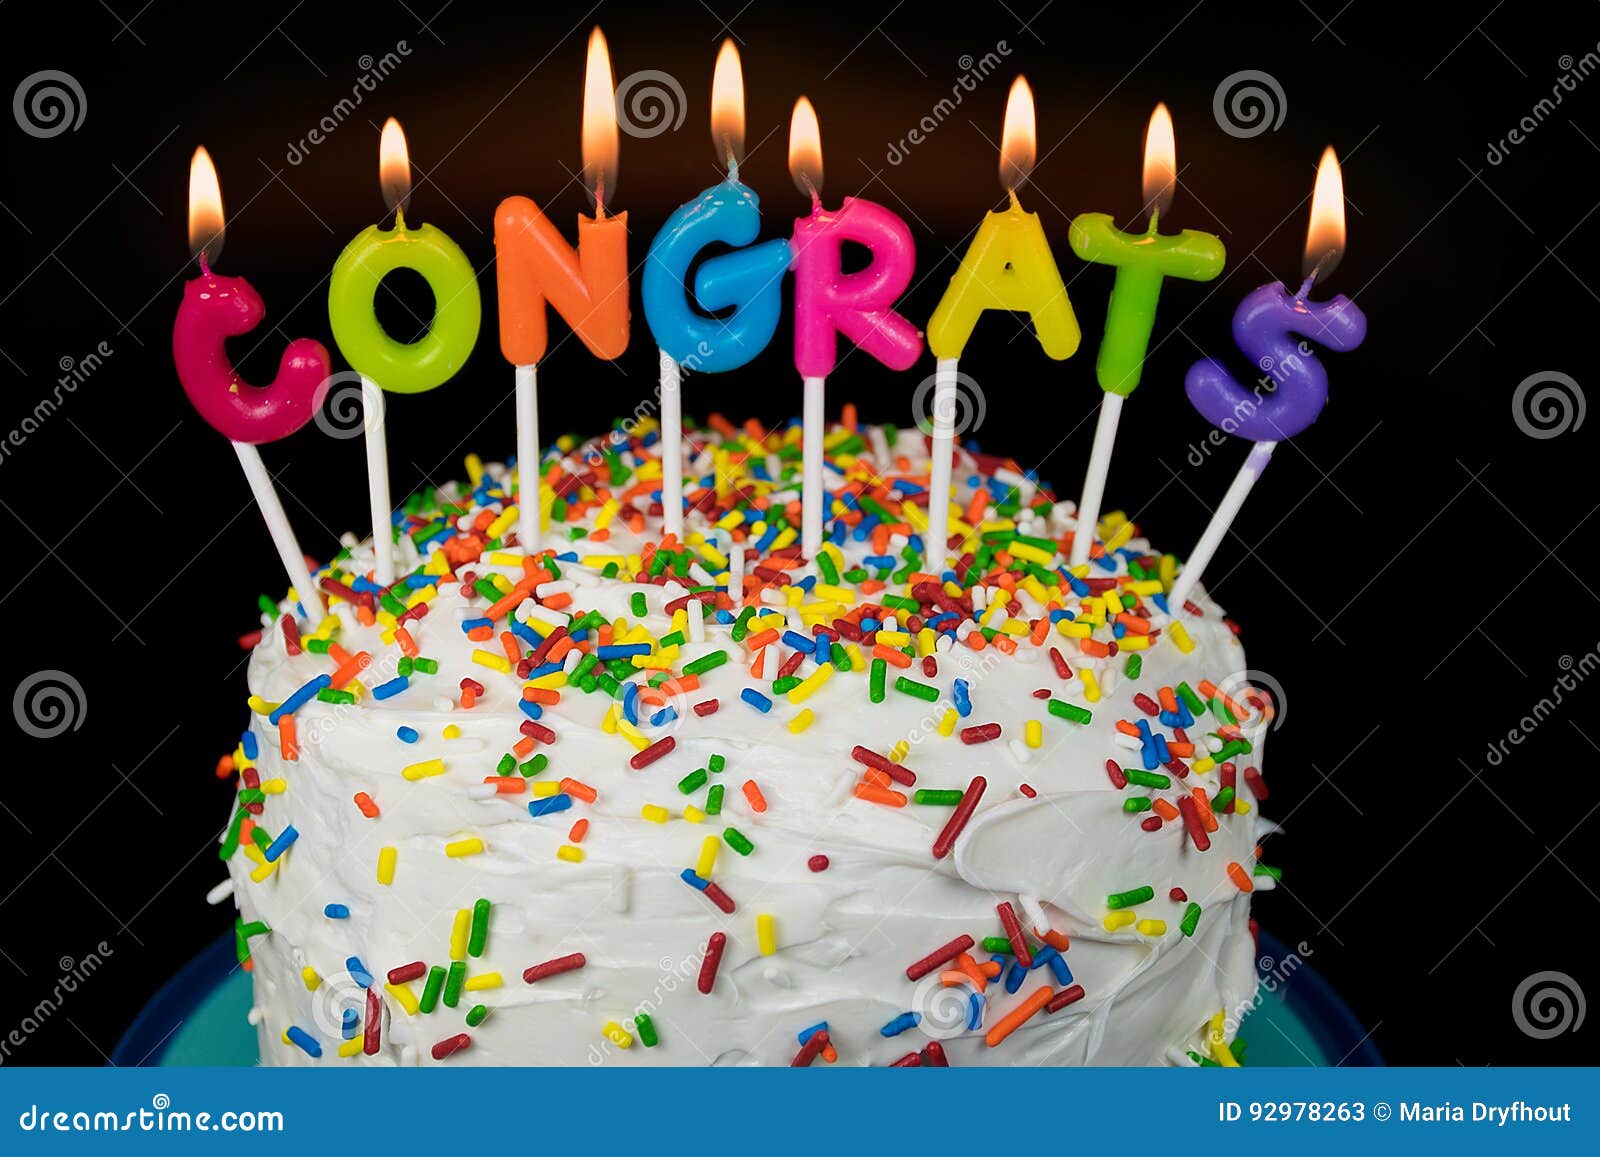 congrats candles on layered cake